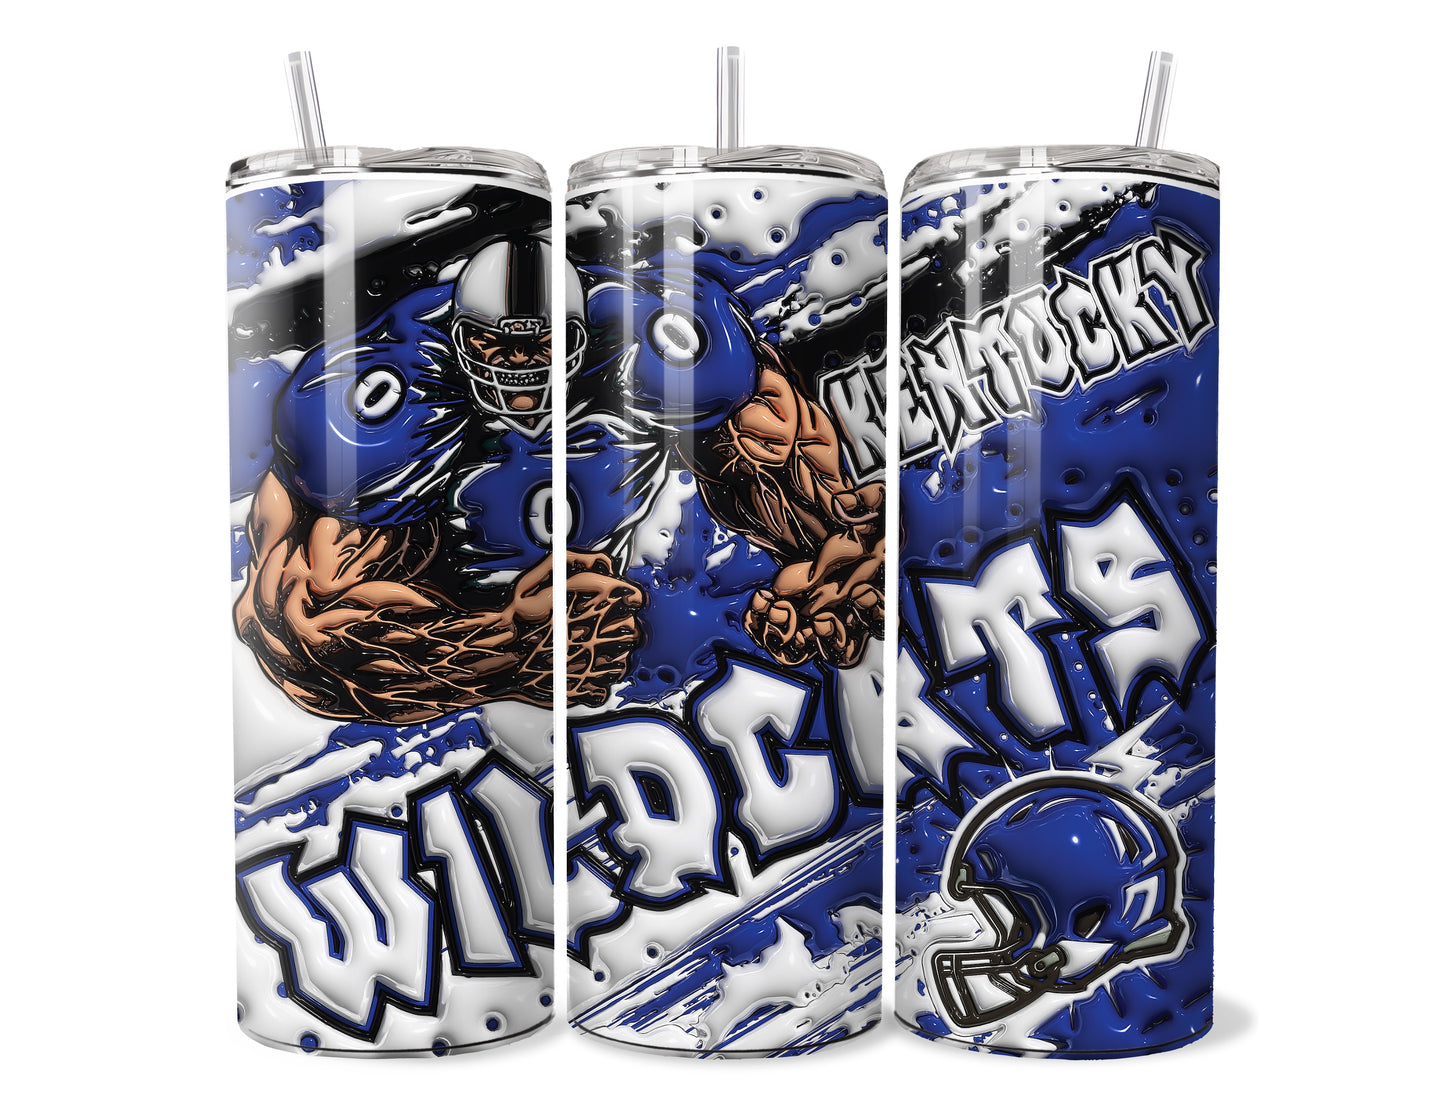 Kentucky Football 30 oz. RTIC Tumbler in Blue by Deluge Concepts